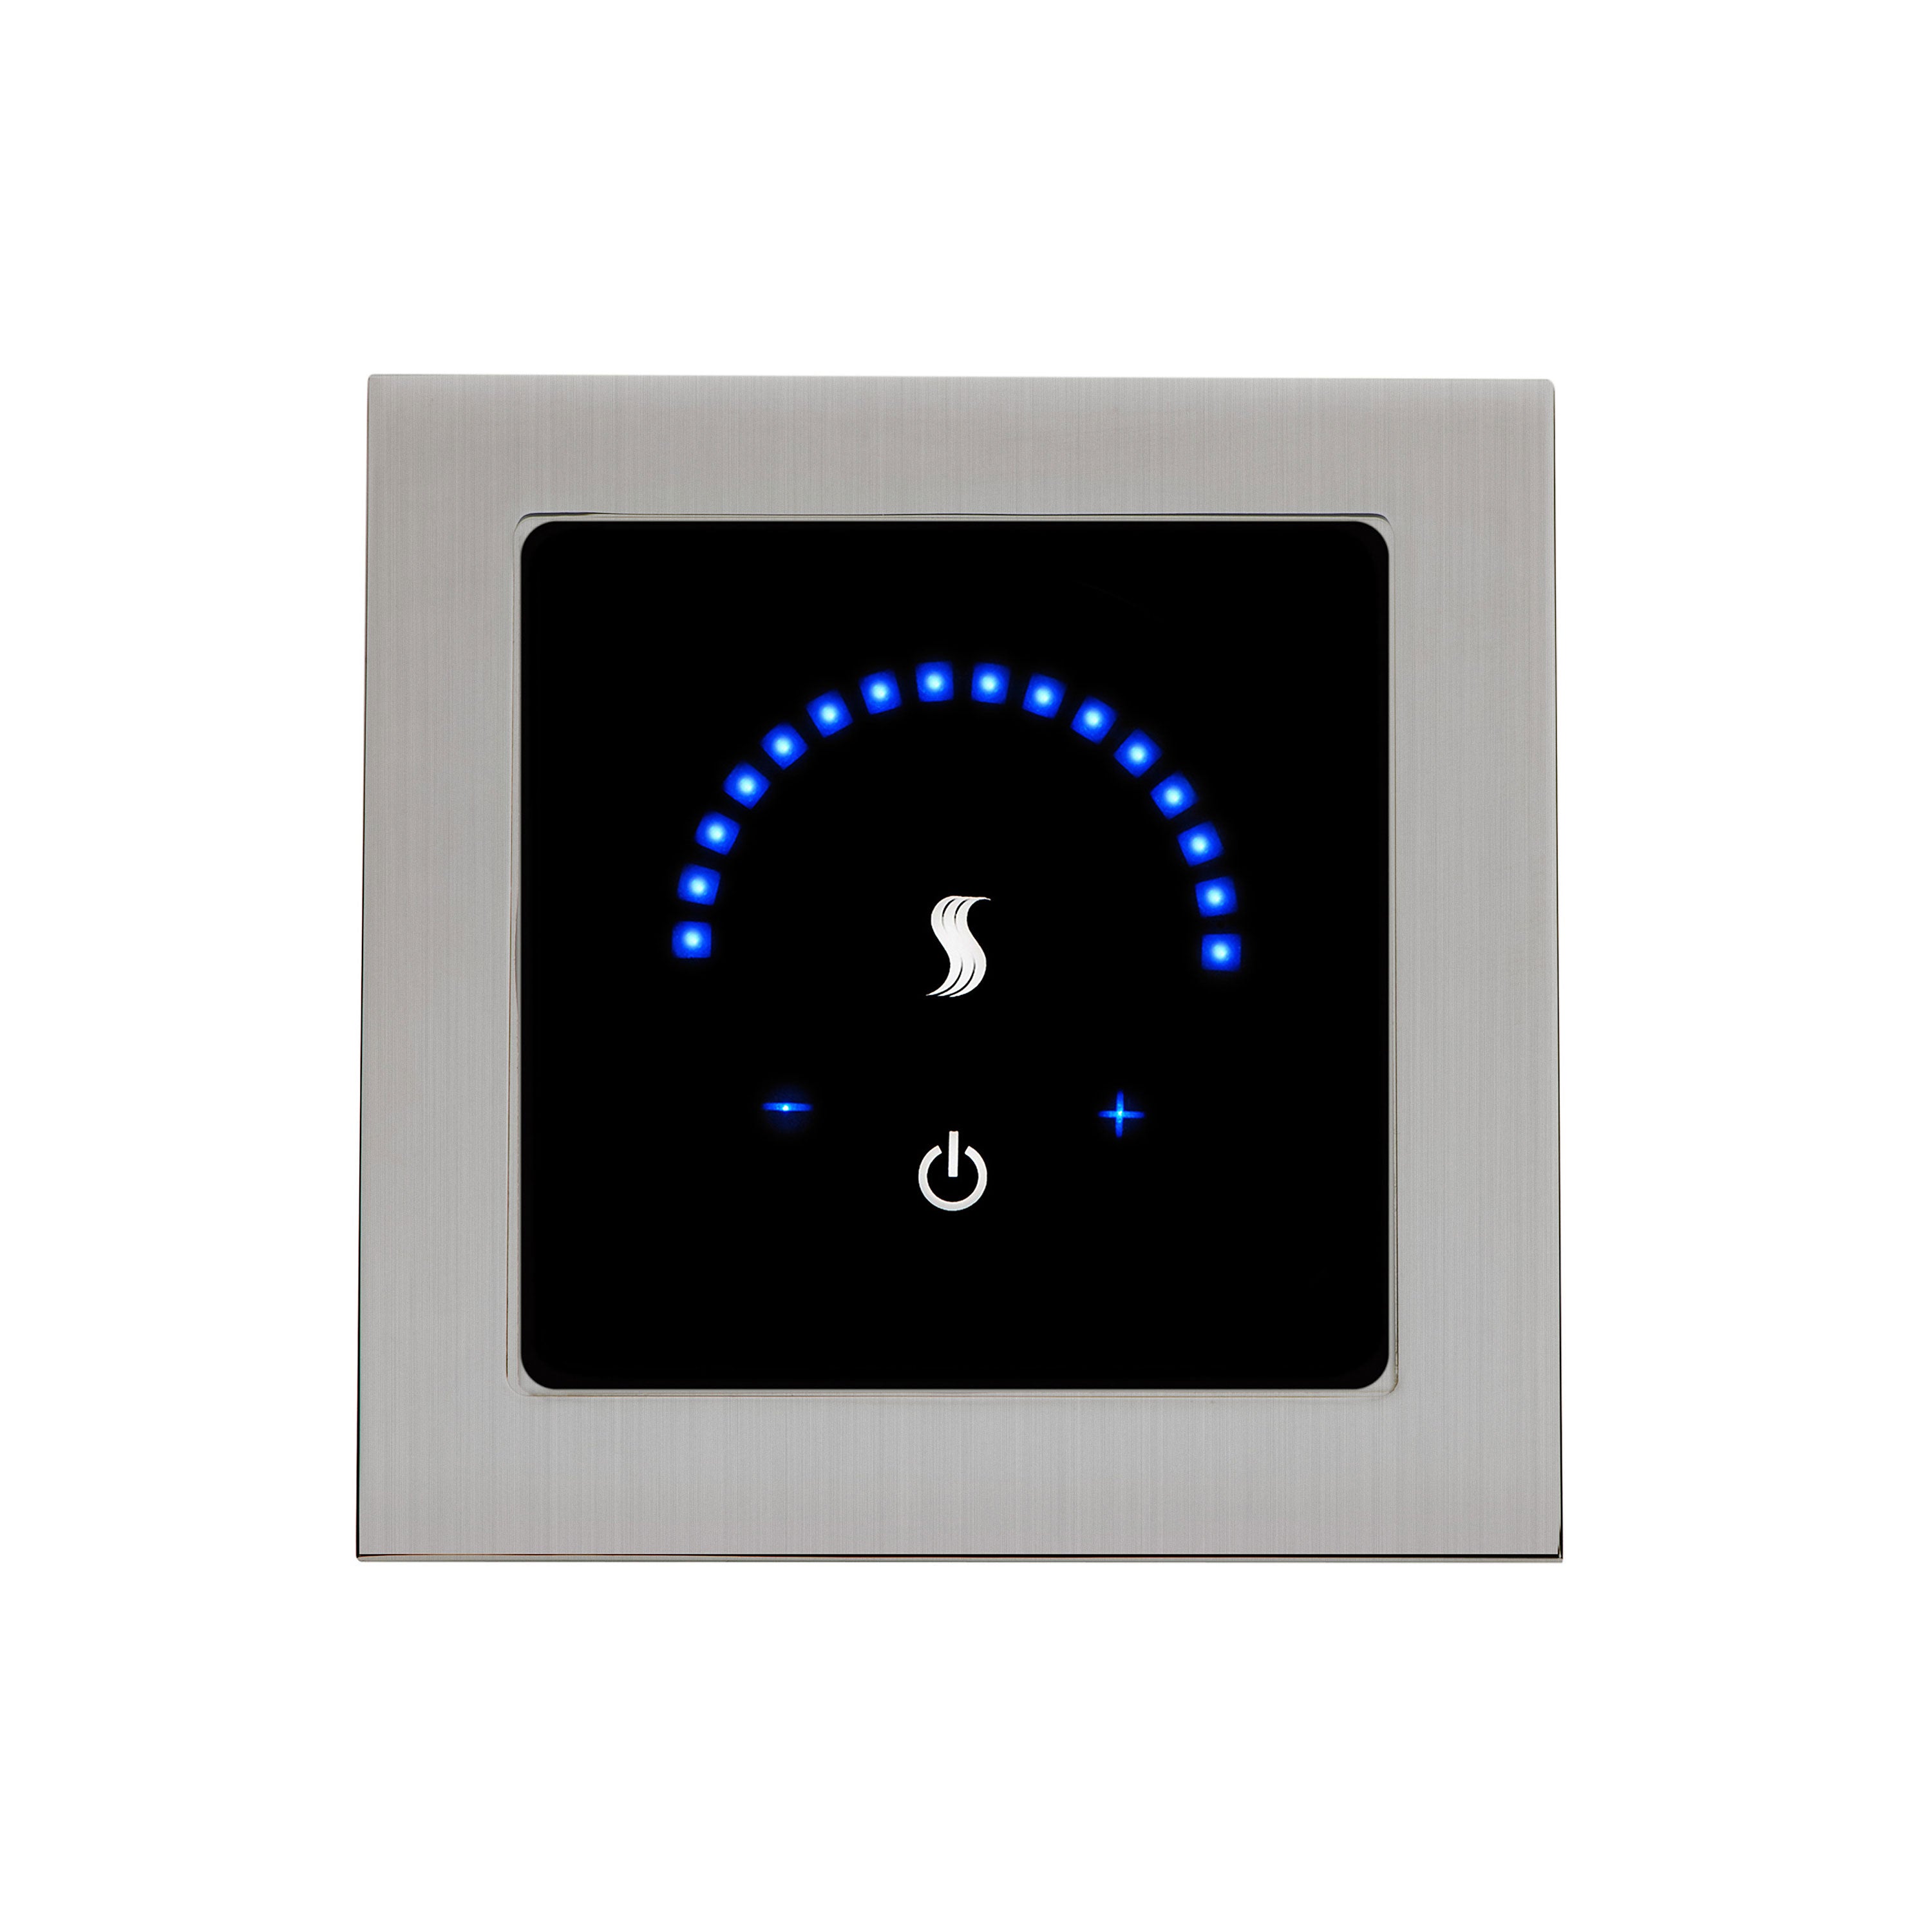 ThermaSol Steam Shower Control Unit - MicroTouch Controller Round